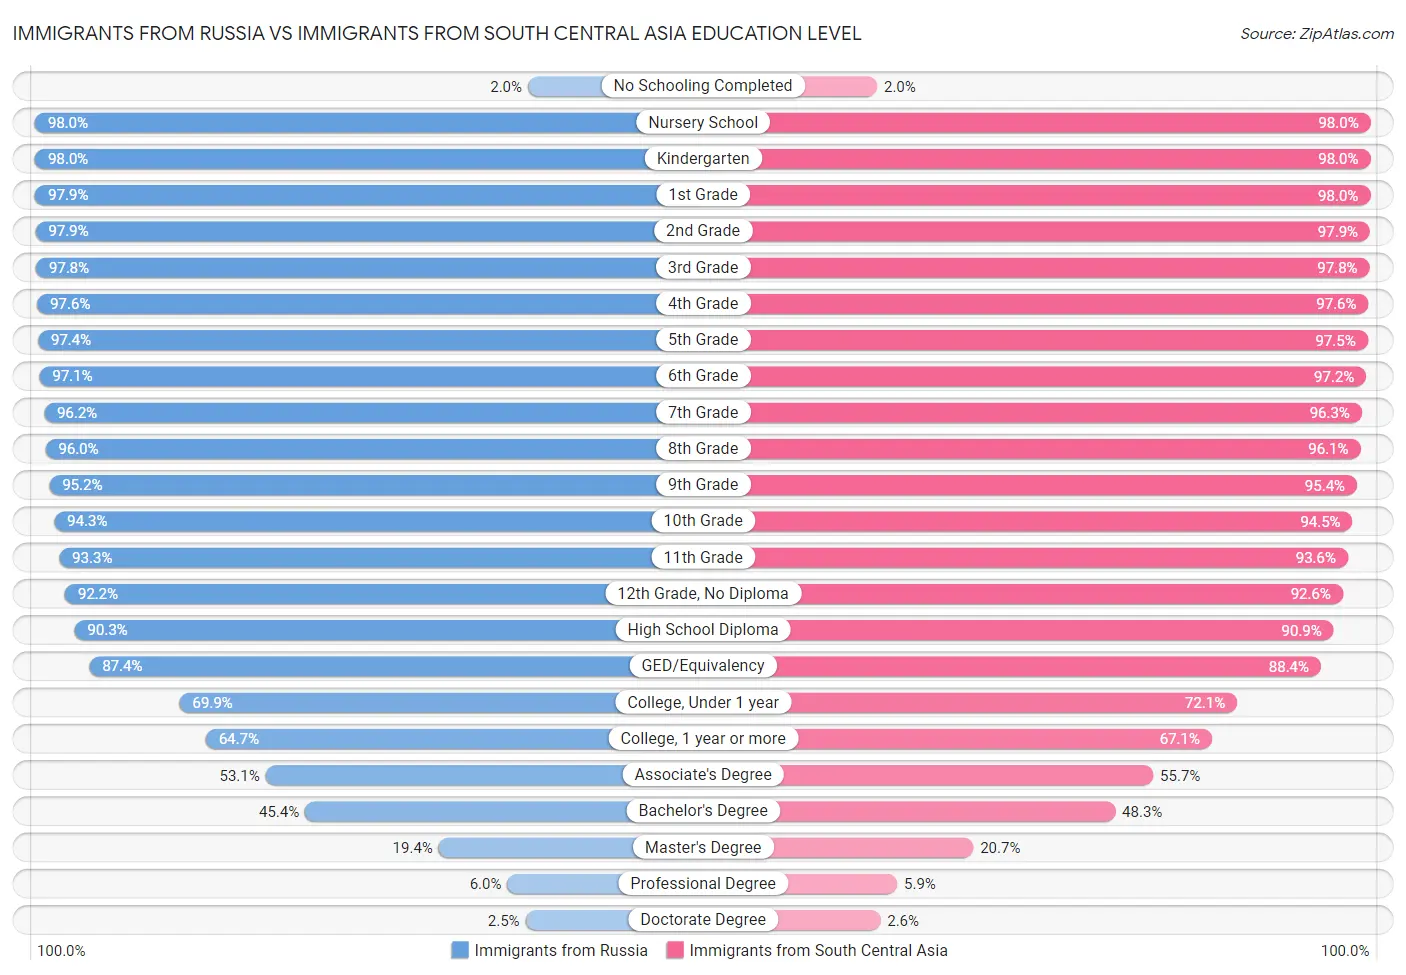 Immigrants from Russia vs Immigrants from South Central Asia Education Level